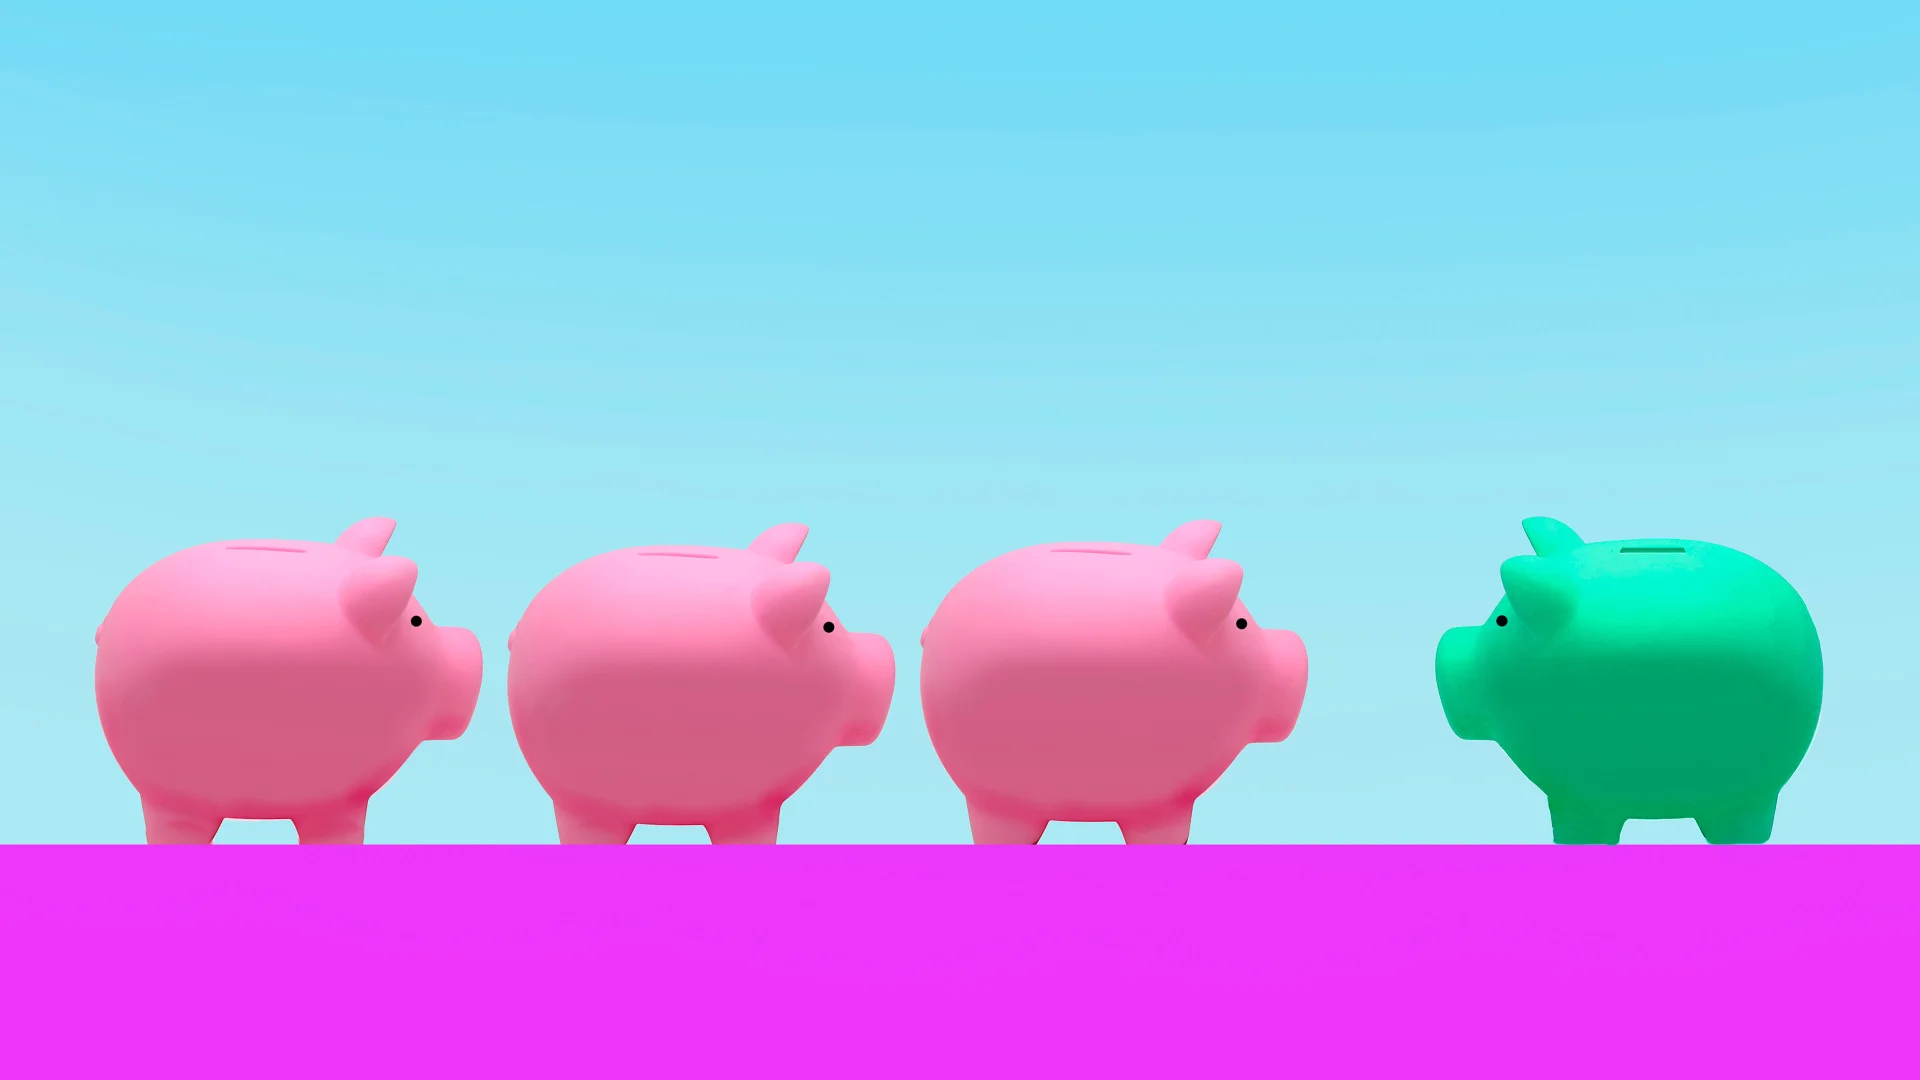 Illustration of a side view of four piggy banks, three pink ones facing to the right, one green piggy bank facing left.